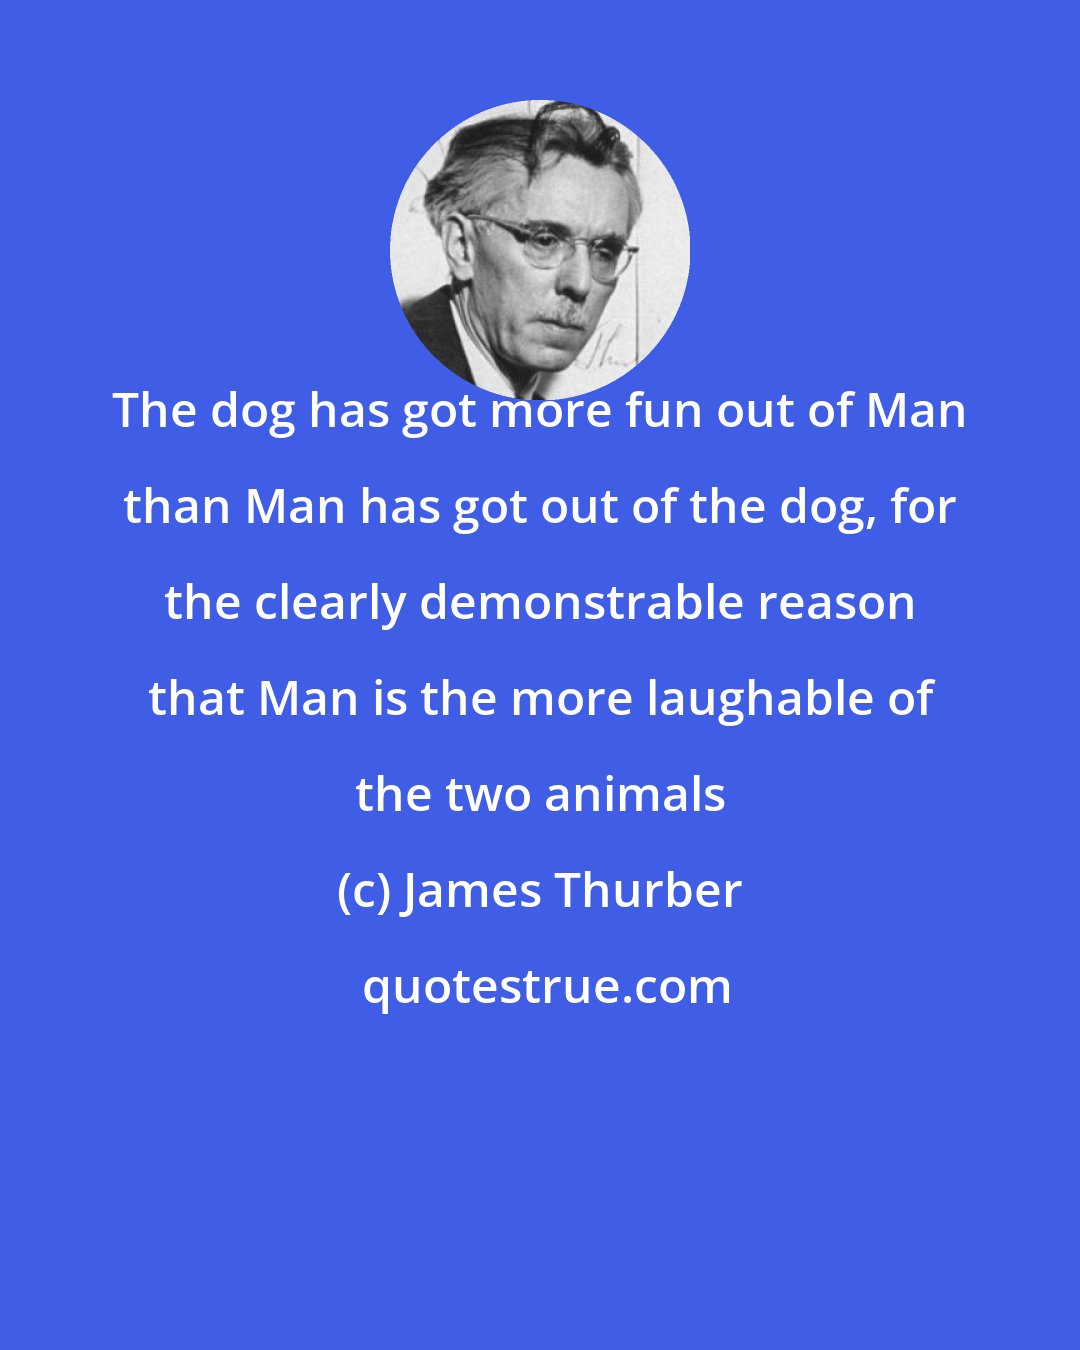 James Thurber: The dog has got more fun out of Man than Man has got out of the dog, for the clearly demonstrable reason that Man is the more laughable of the two animals